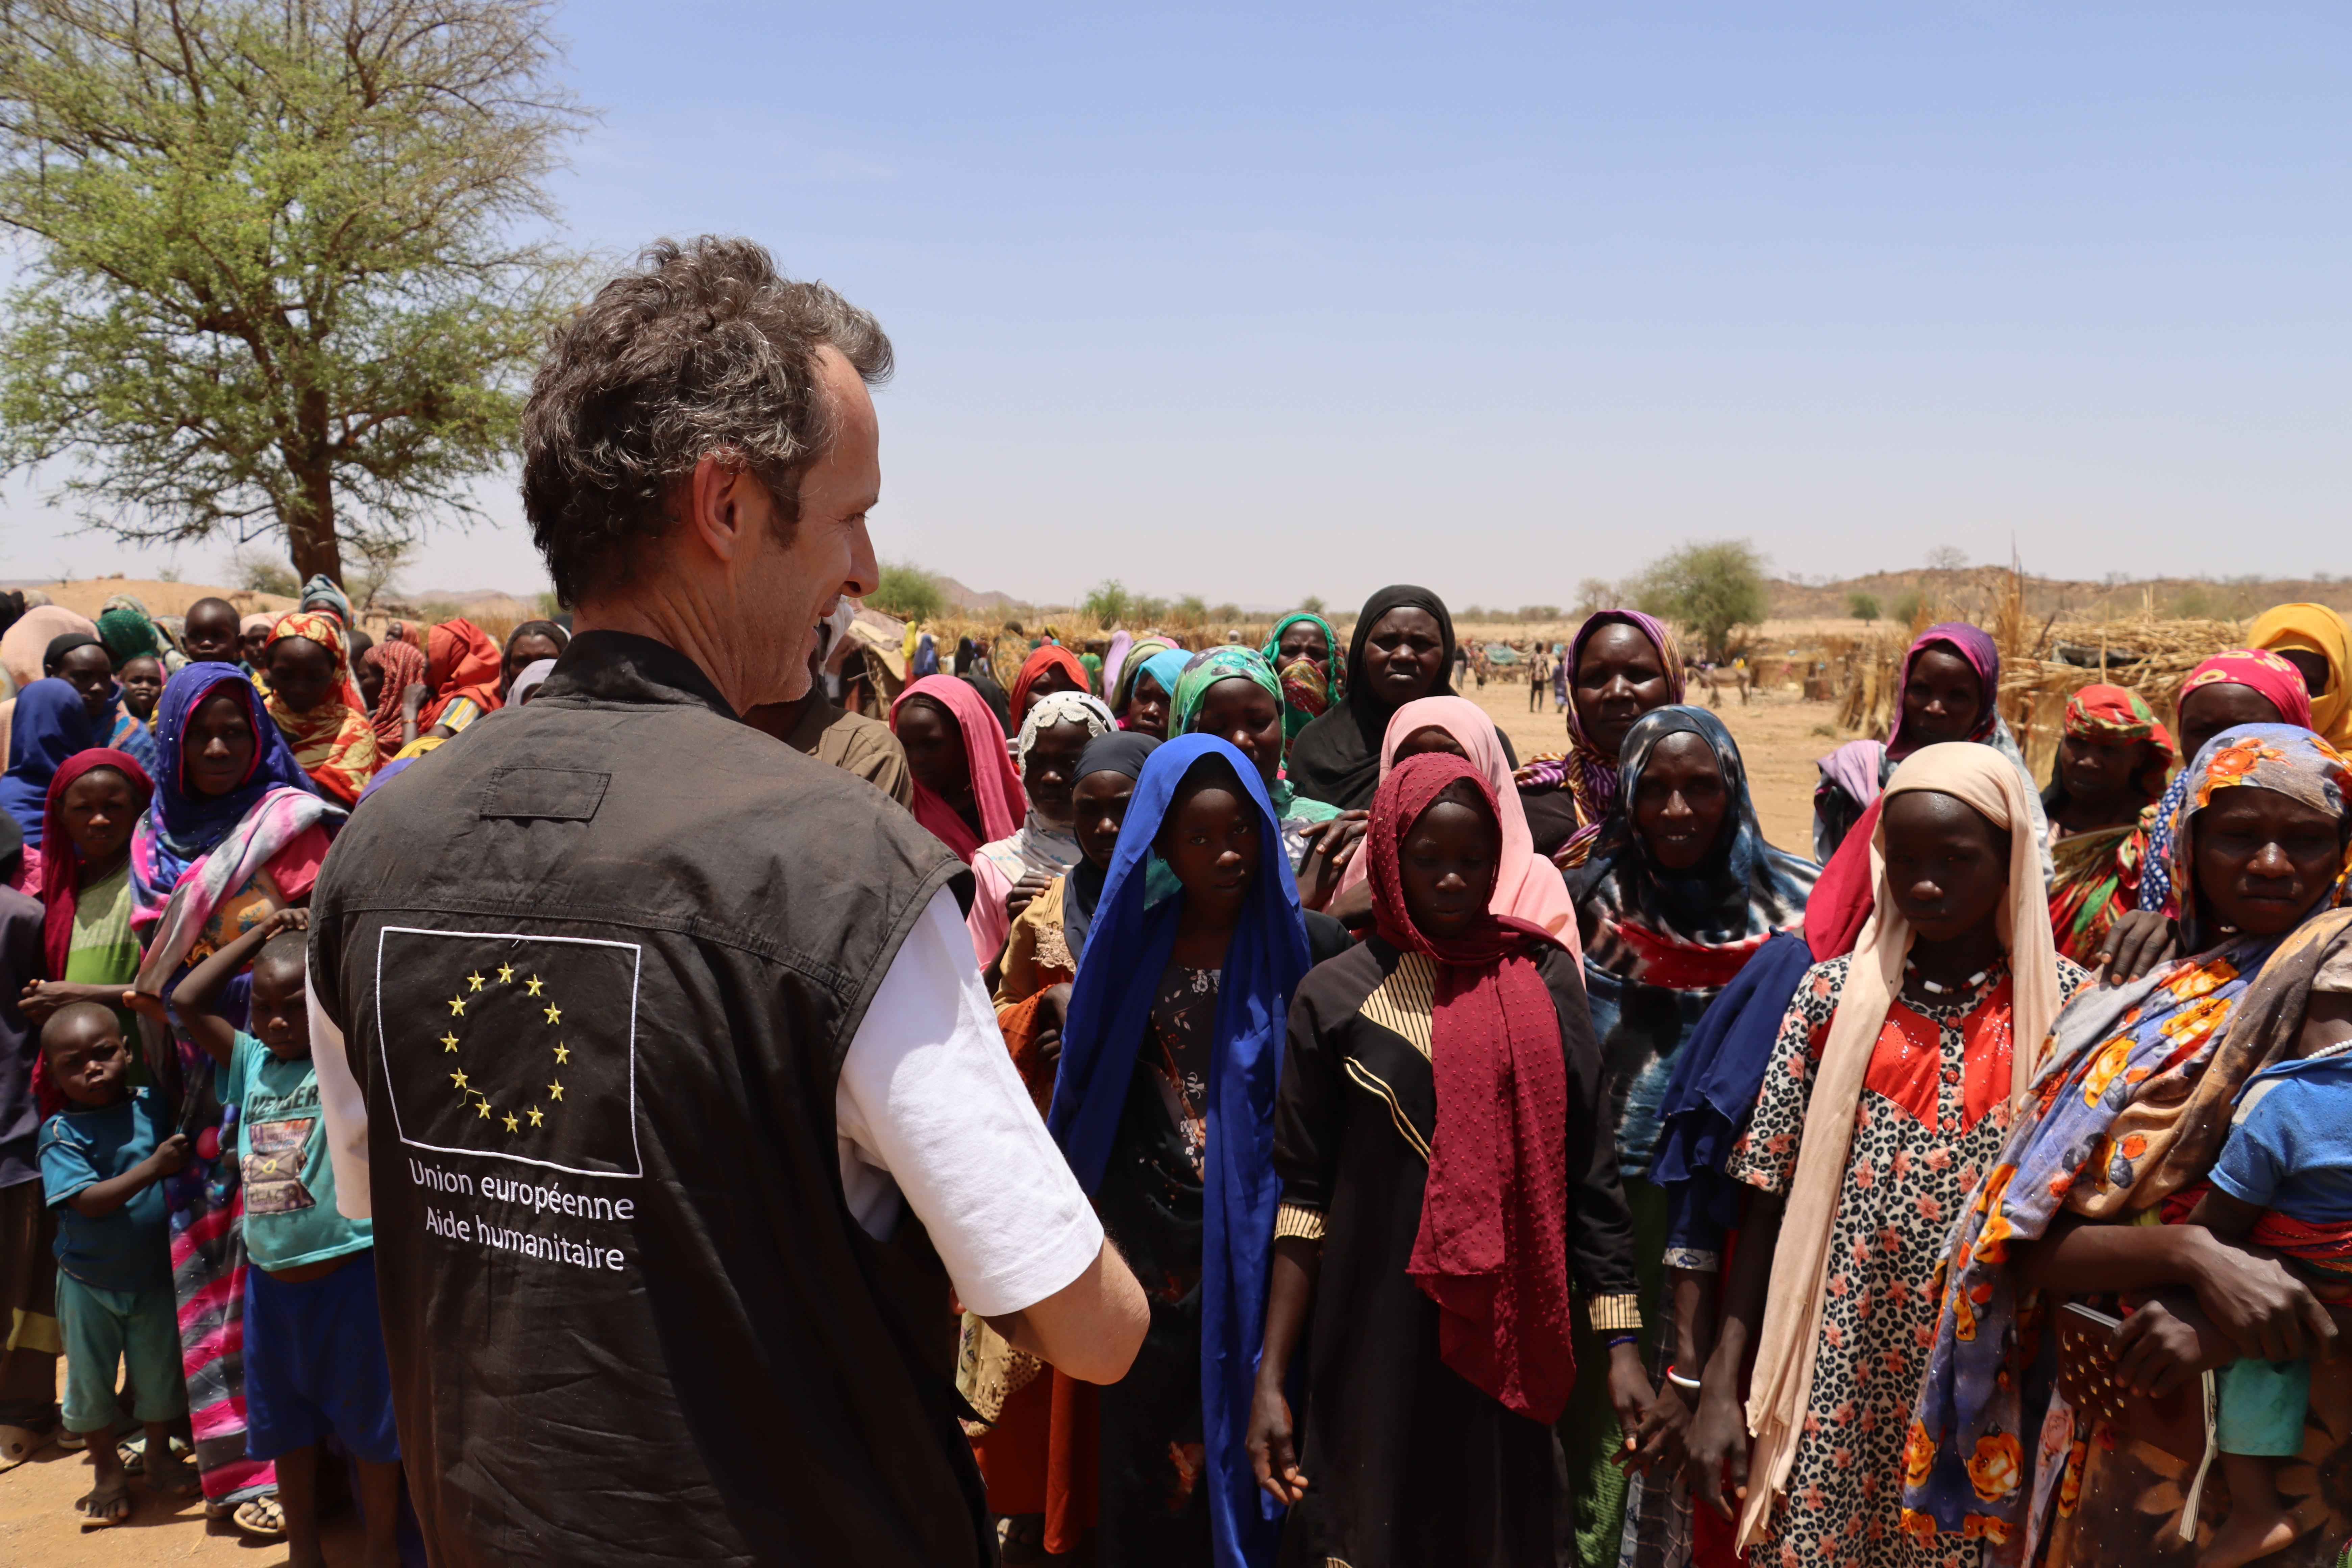 On the border: Chad confronted with sudden wave of Sudanese refugees 01